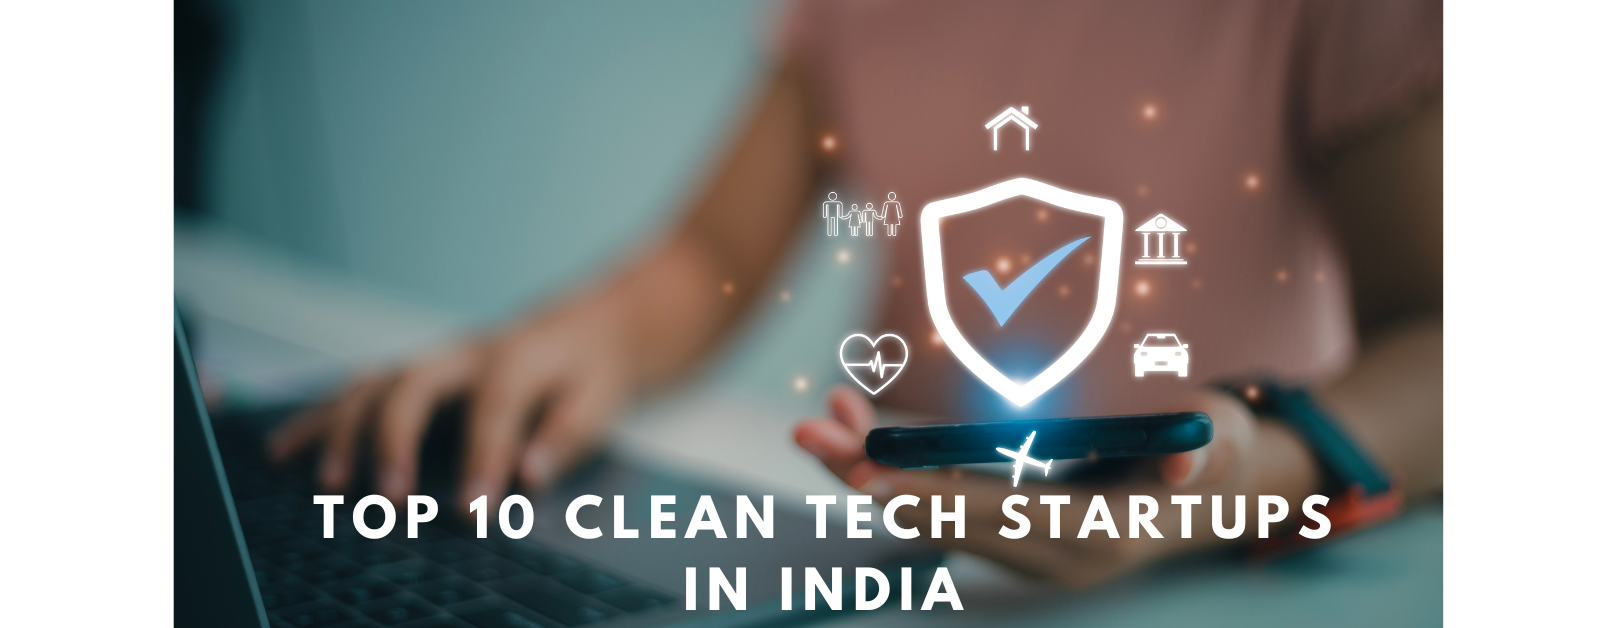 Top 10 Insurance Tech Startups in India